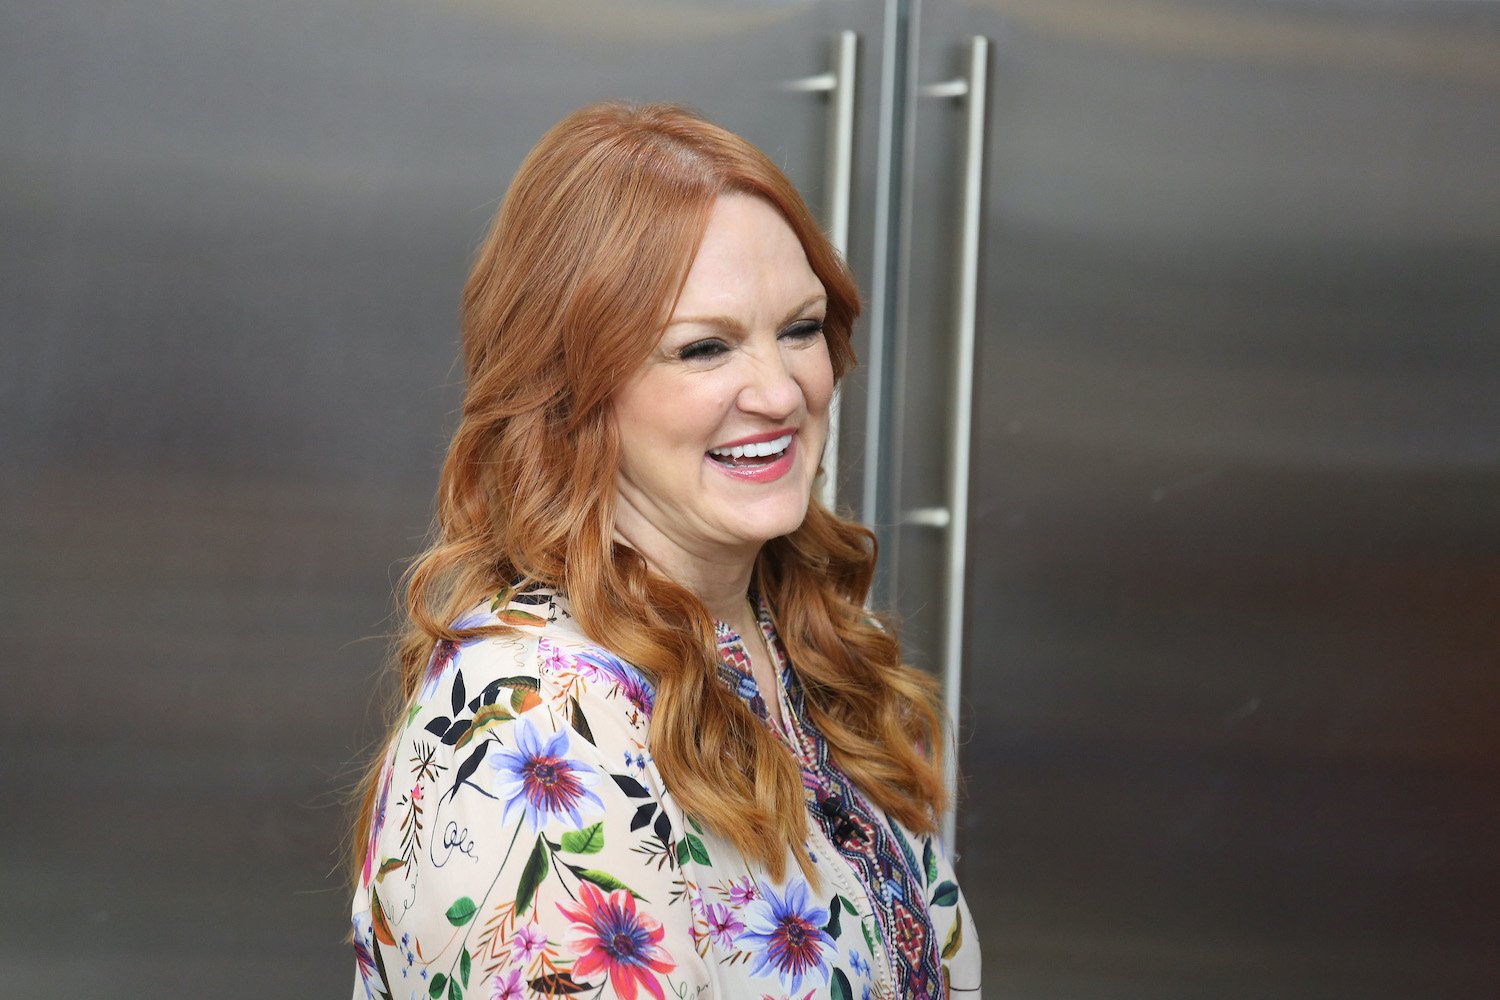 'The Pioneer Woman' Ree Drummond wears a bright shirt and smiles on the set of the 'Today' show in 2019.